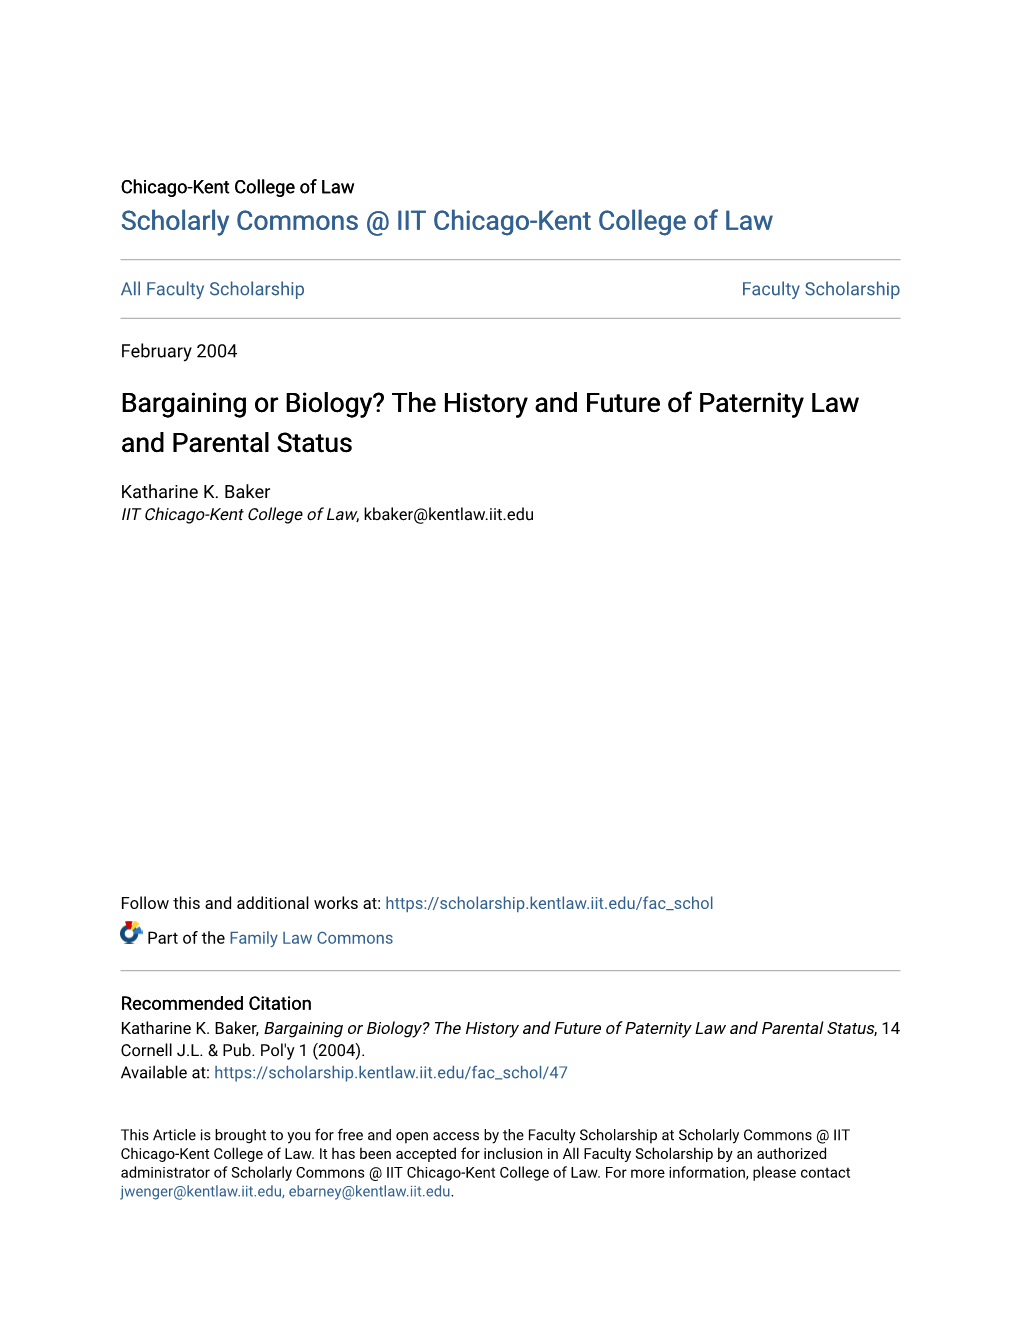 The History and Future of Paternity Law and Parental Status